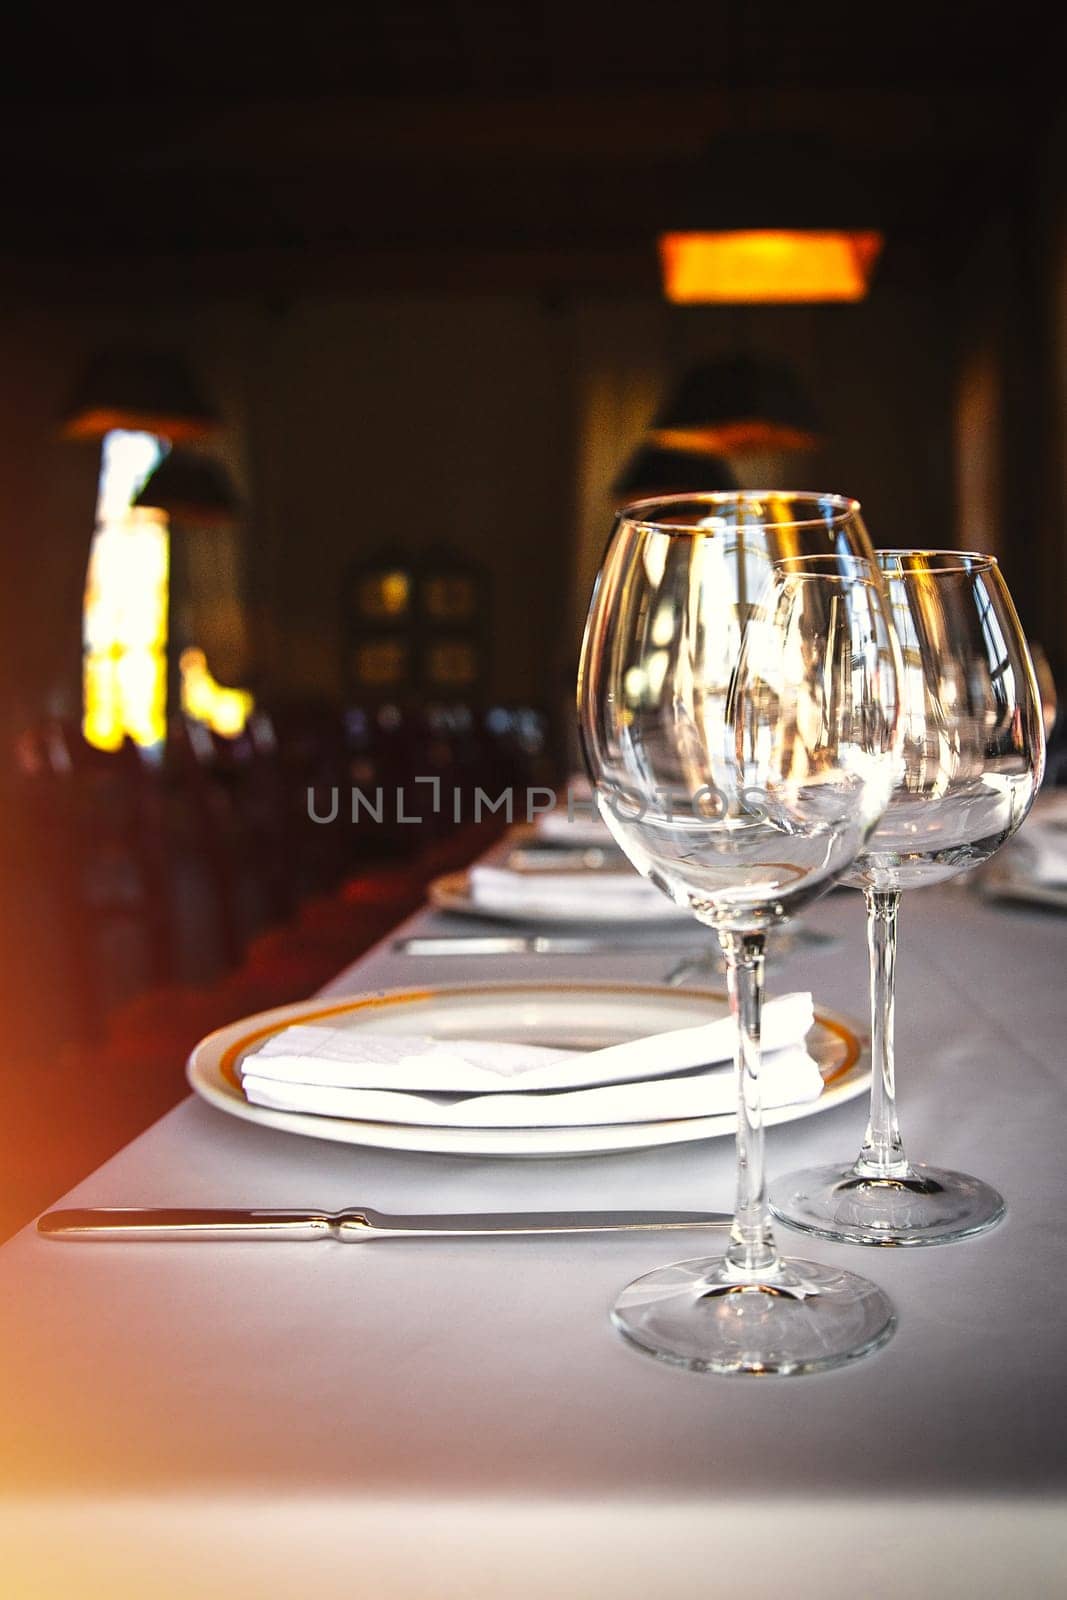 Dining table set with wine glasses by the window in a luxury restaurant by Rom4ek